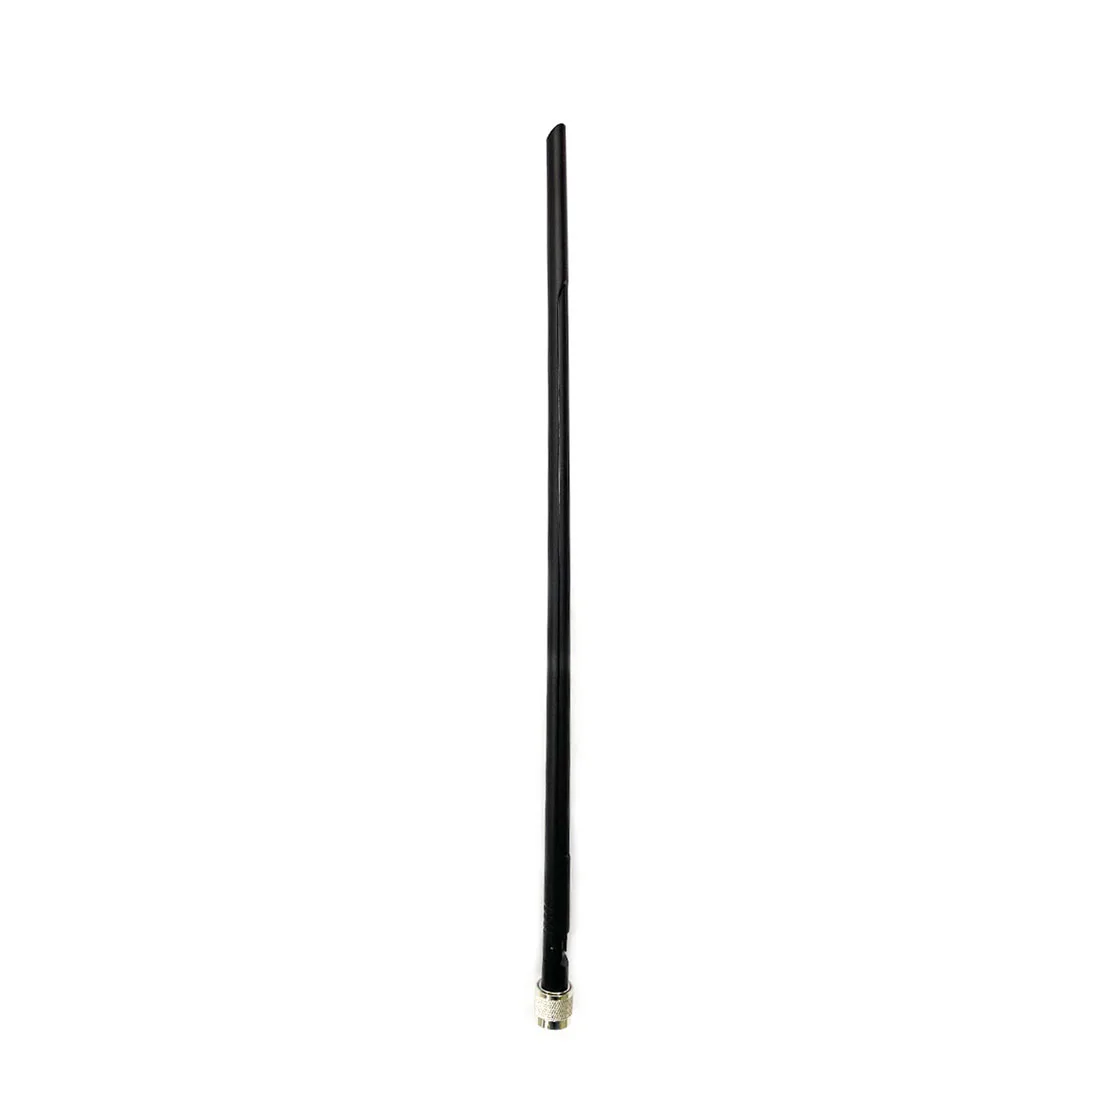 

3G GSM GPRS UMTS Antenna 10dBi High Gain 800/850/900/1800/1900/2170 MHZ OMNI Aerial N Type Male Connector NEW